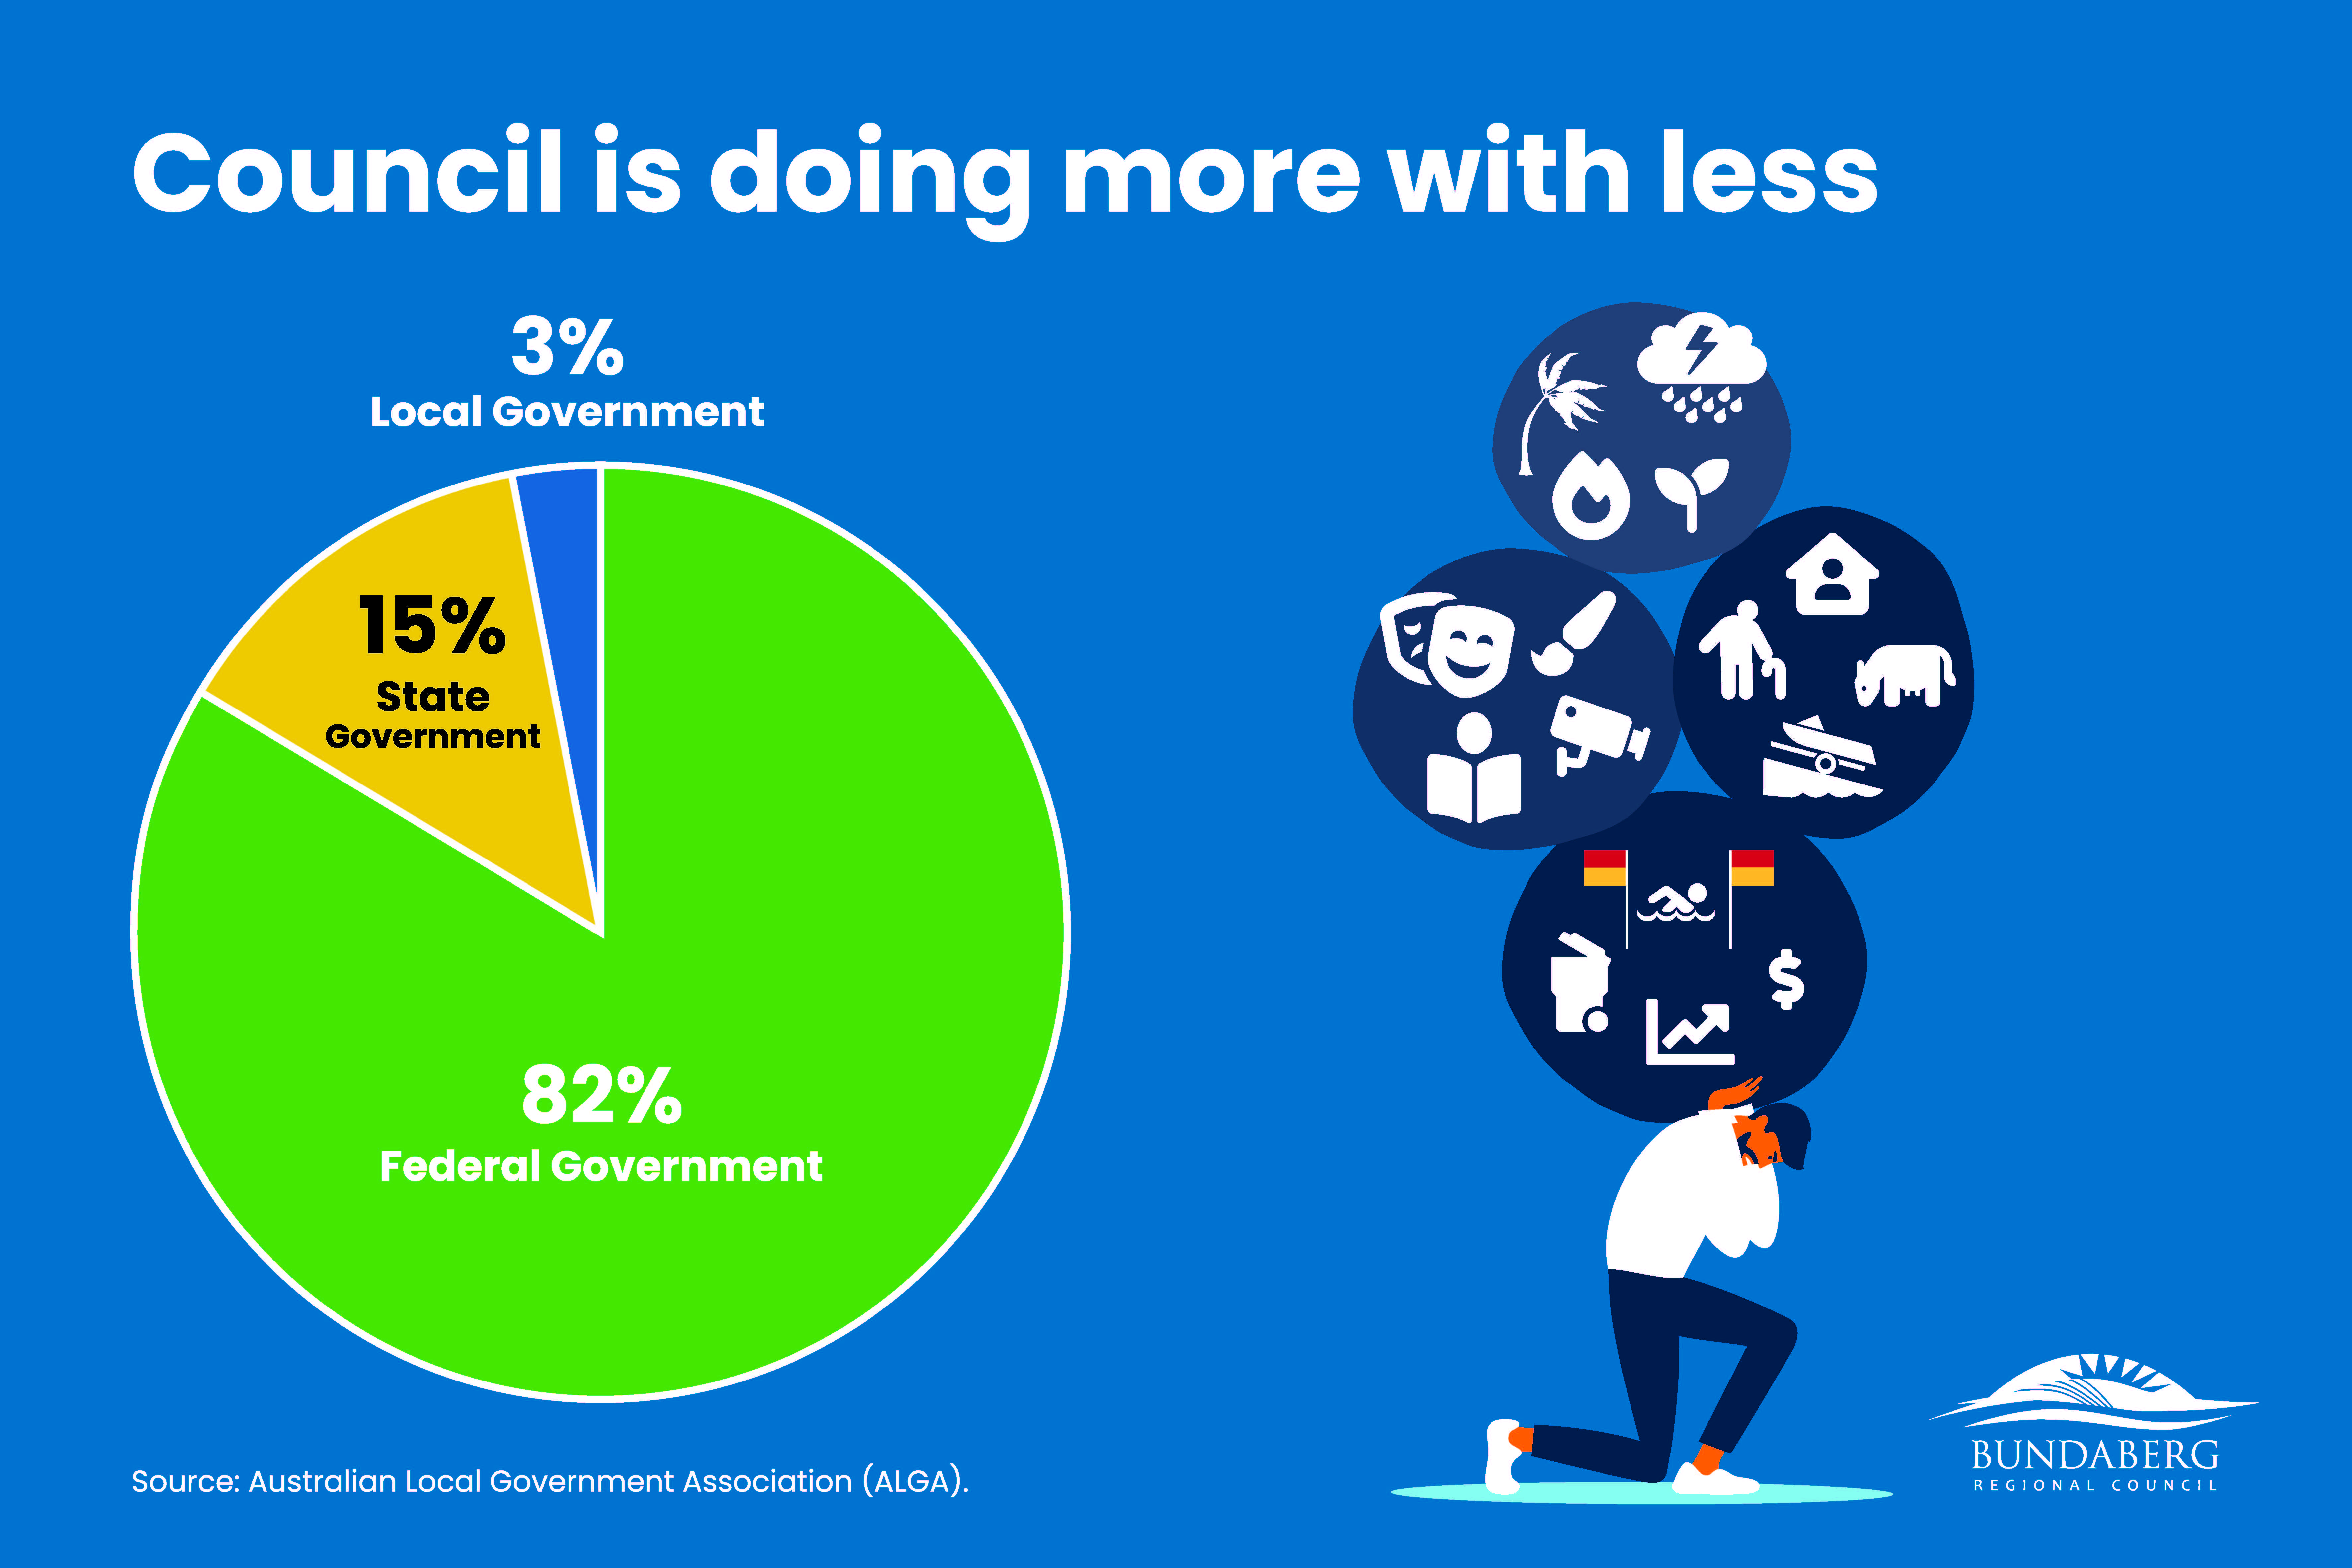 Council is doing more with less